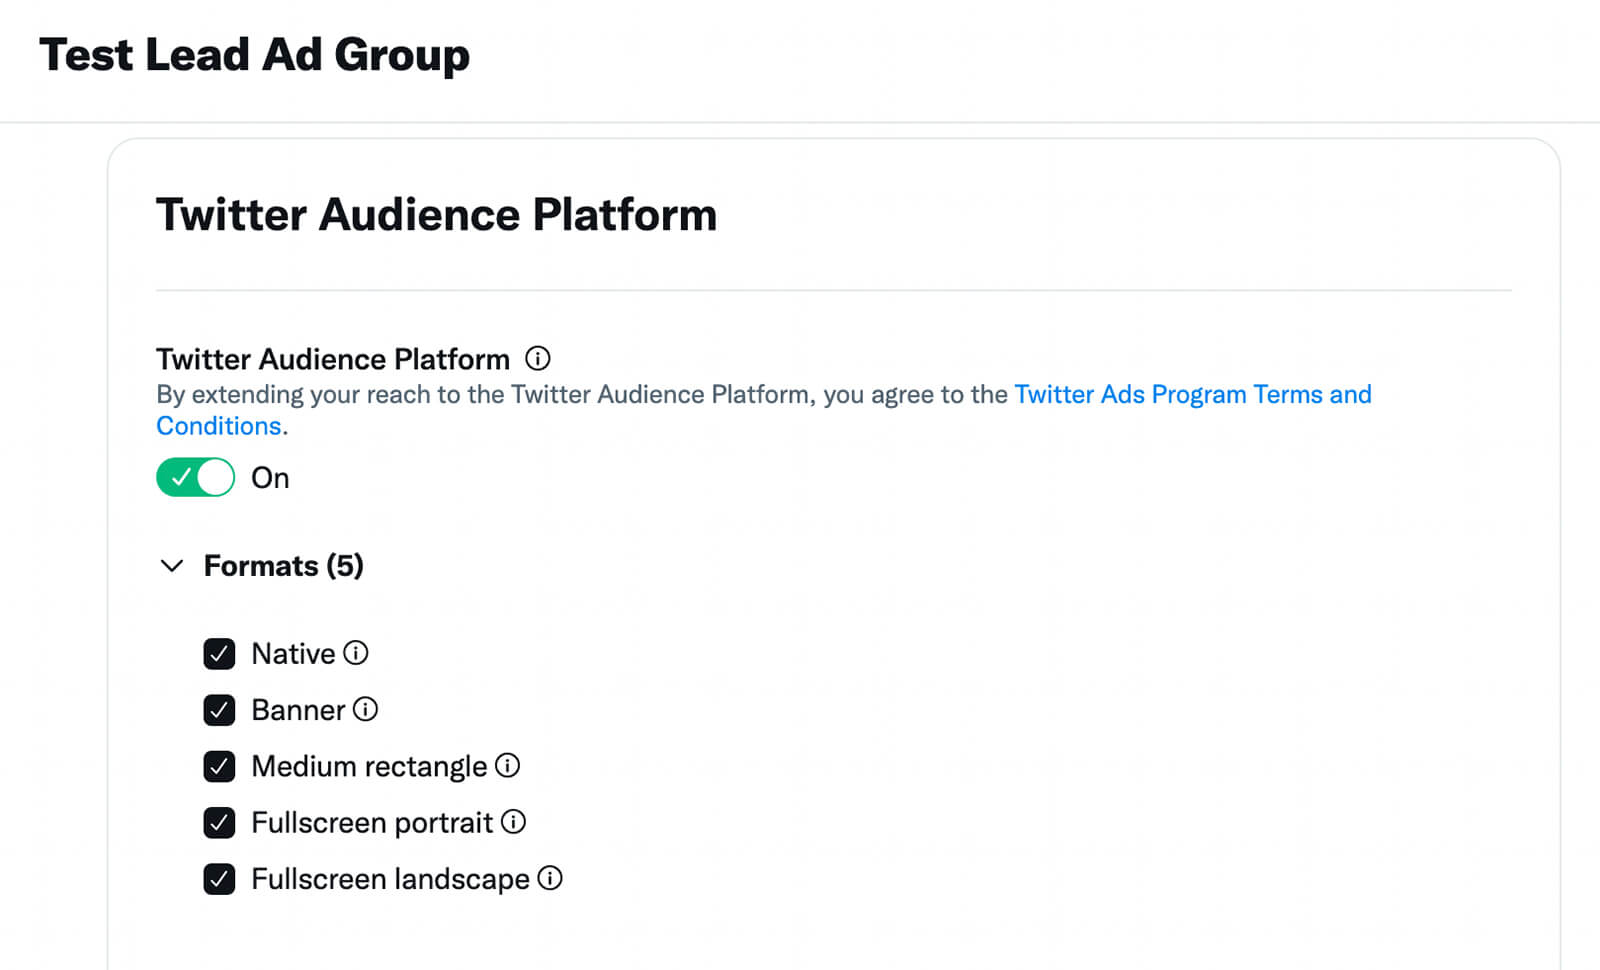 how-to-build-a-target-audience-using-twitter-pixel-website-traffice-beyond-twitter-use-platform-expand-reach-of-campaign-select-formats-deliver-value-upload-dispaly-creatives-example-25